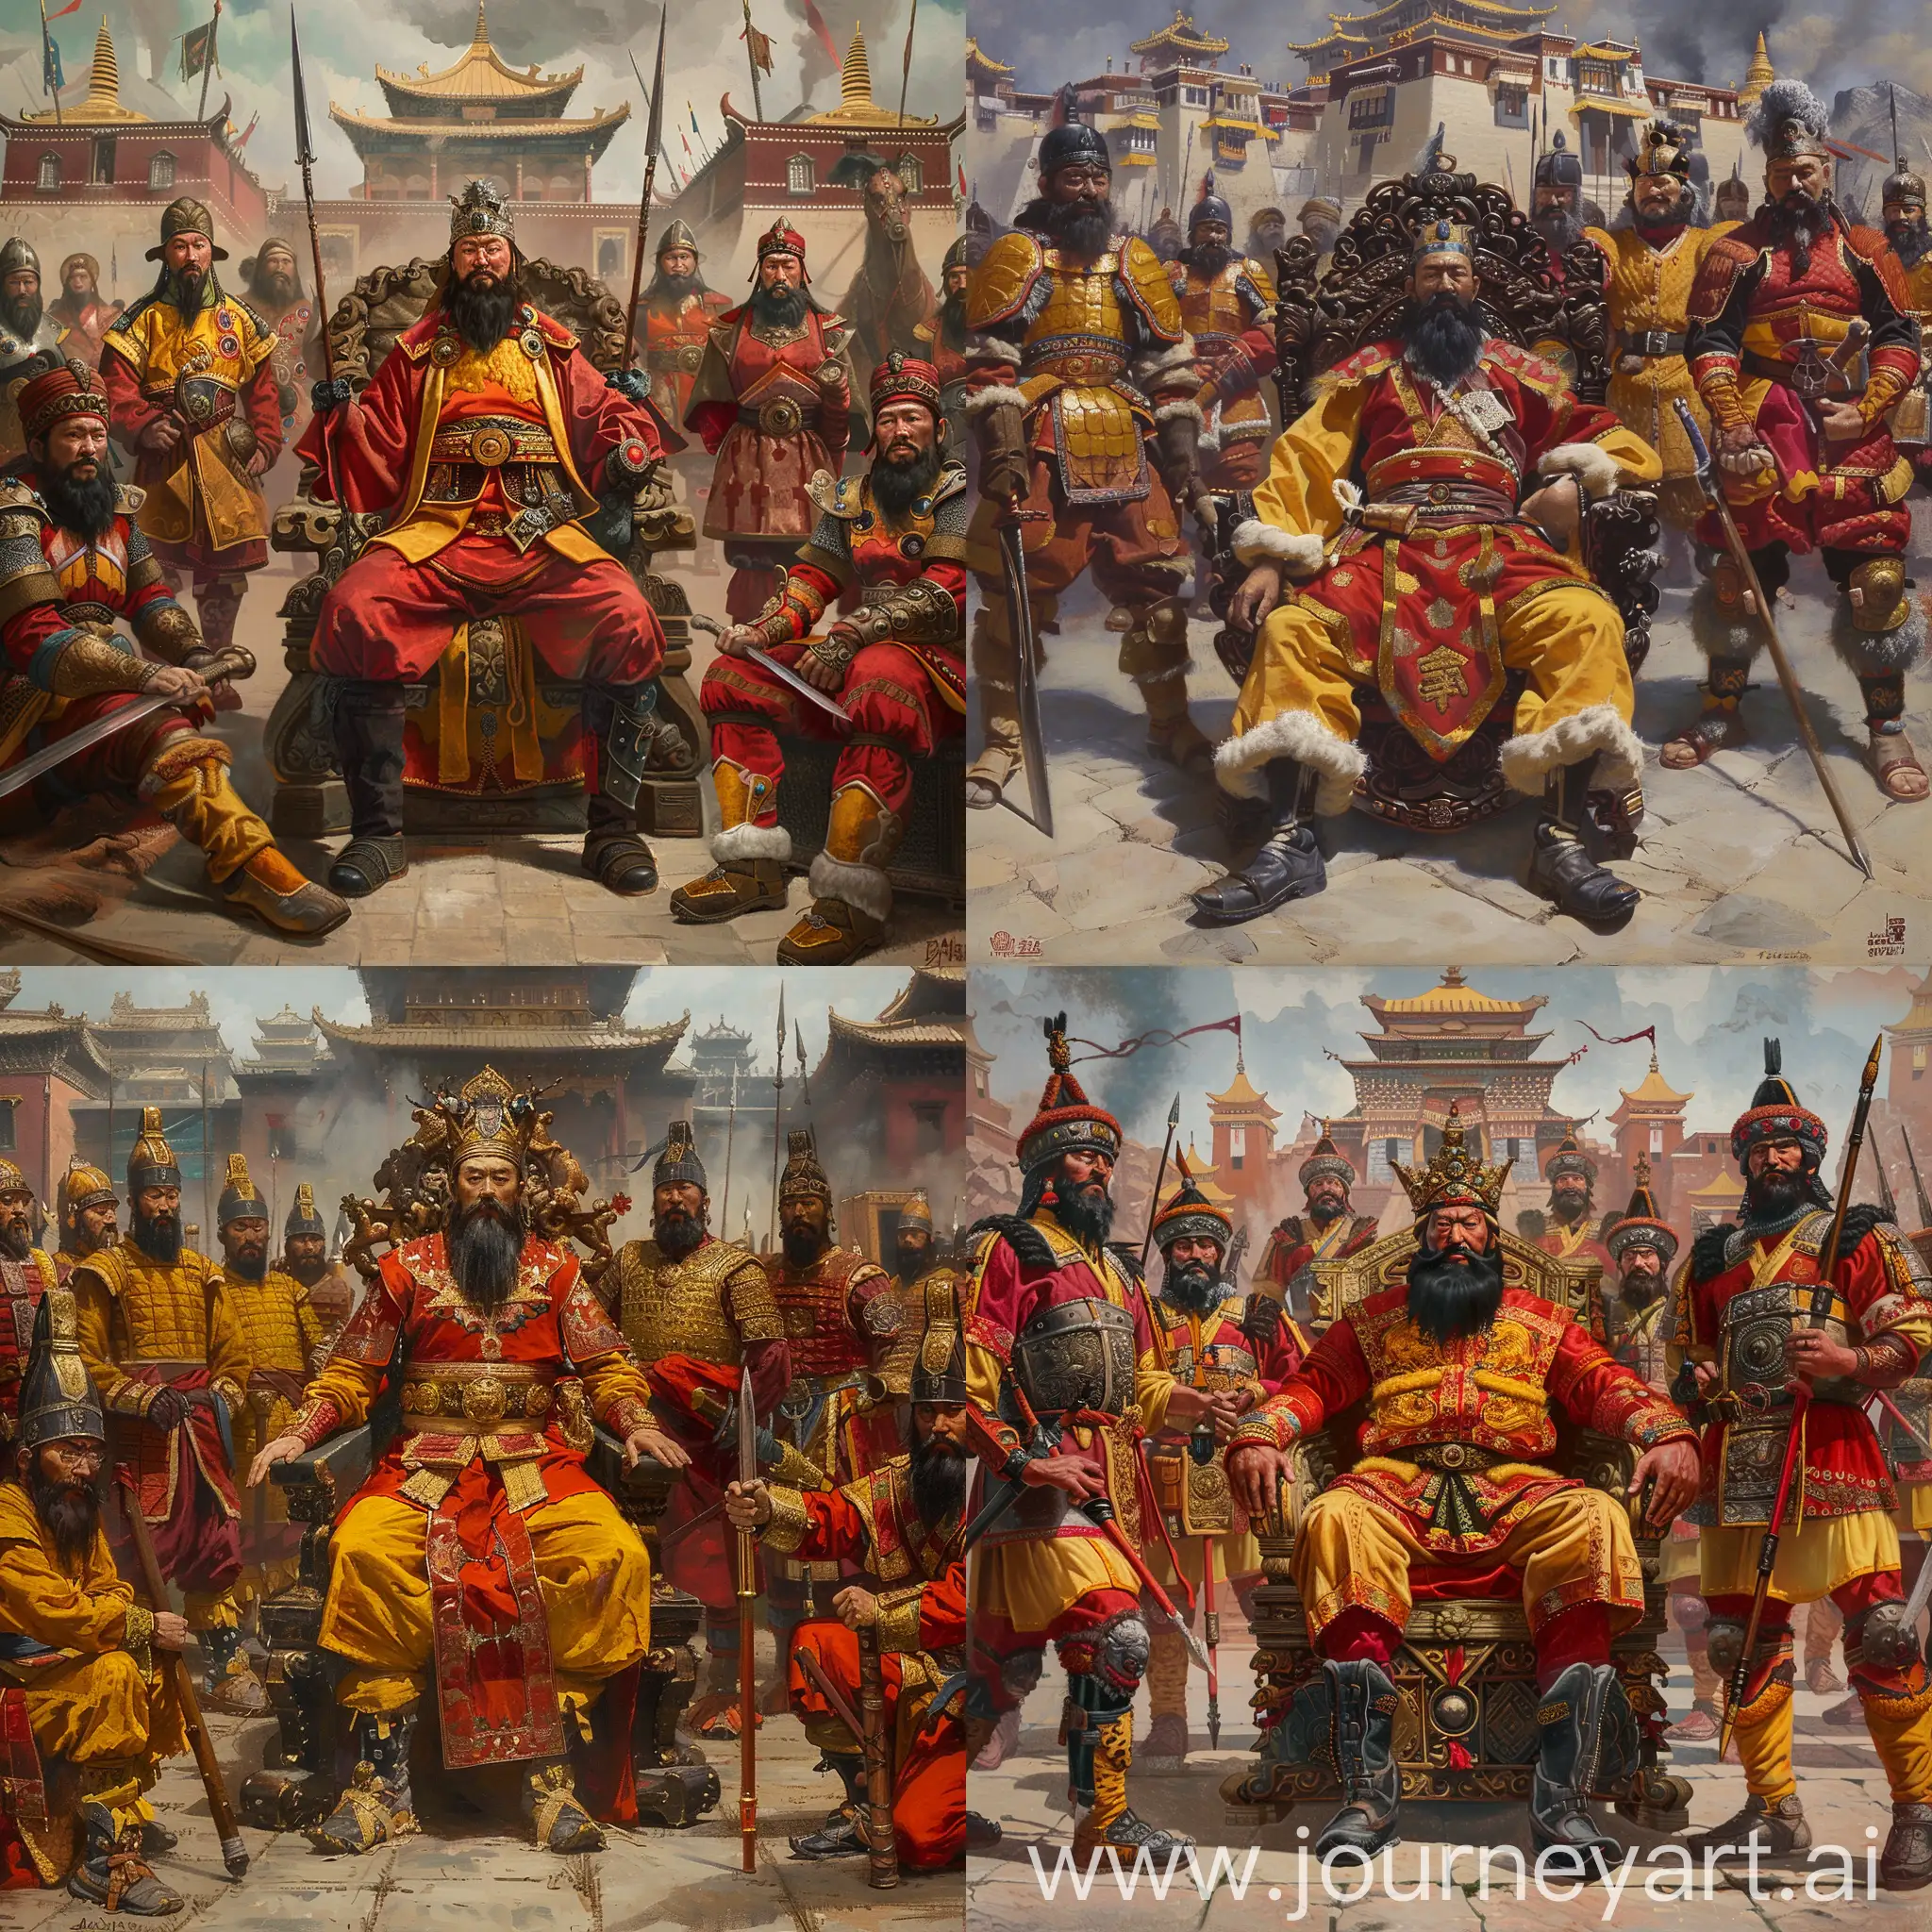 Medieval-Tibetan-King-on-Throne-Surrounded-by-Warriors-in-Palace-Setting